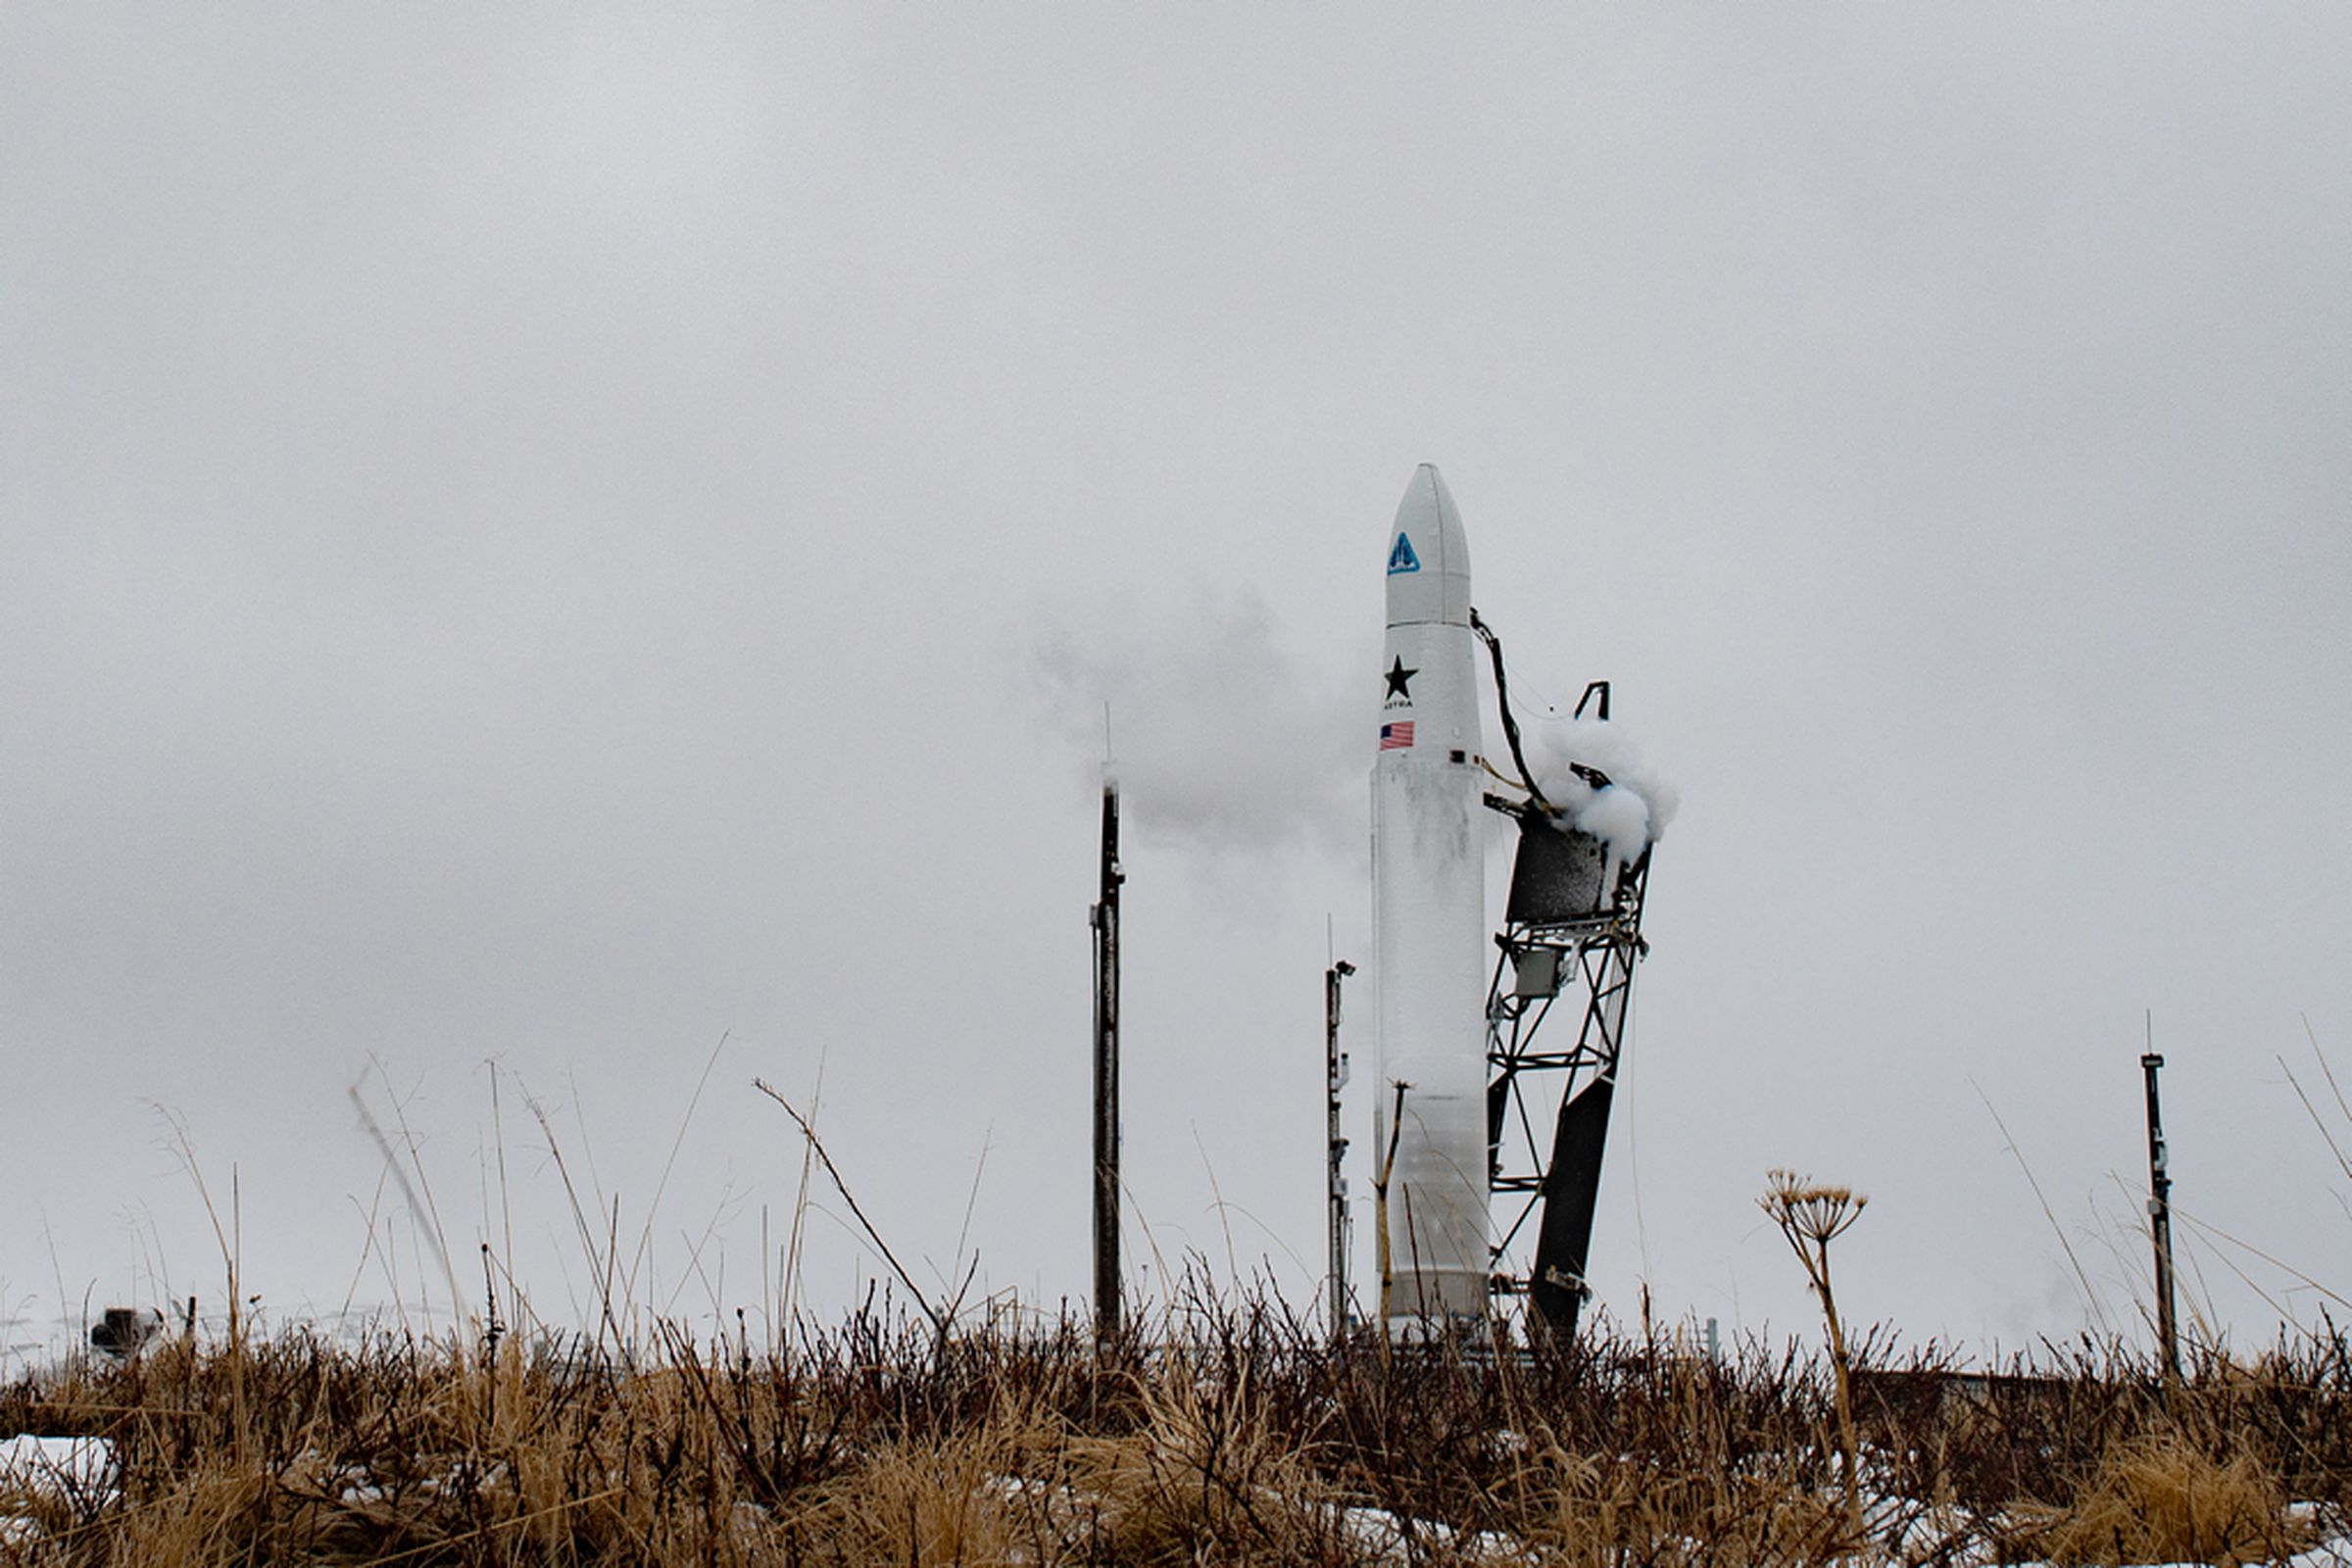 Astra’s rocket on the launchpad in Alaska.